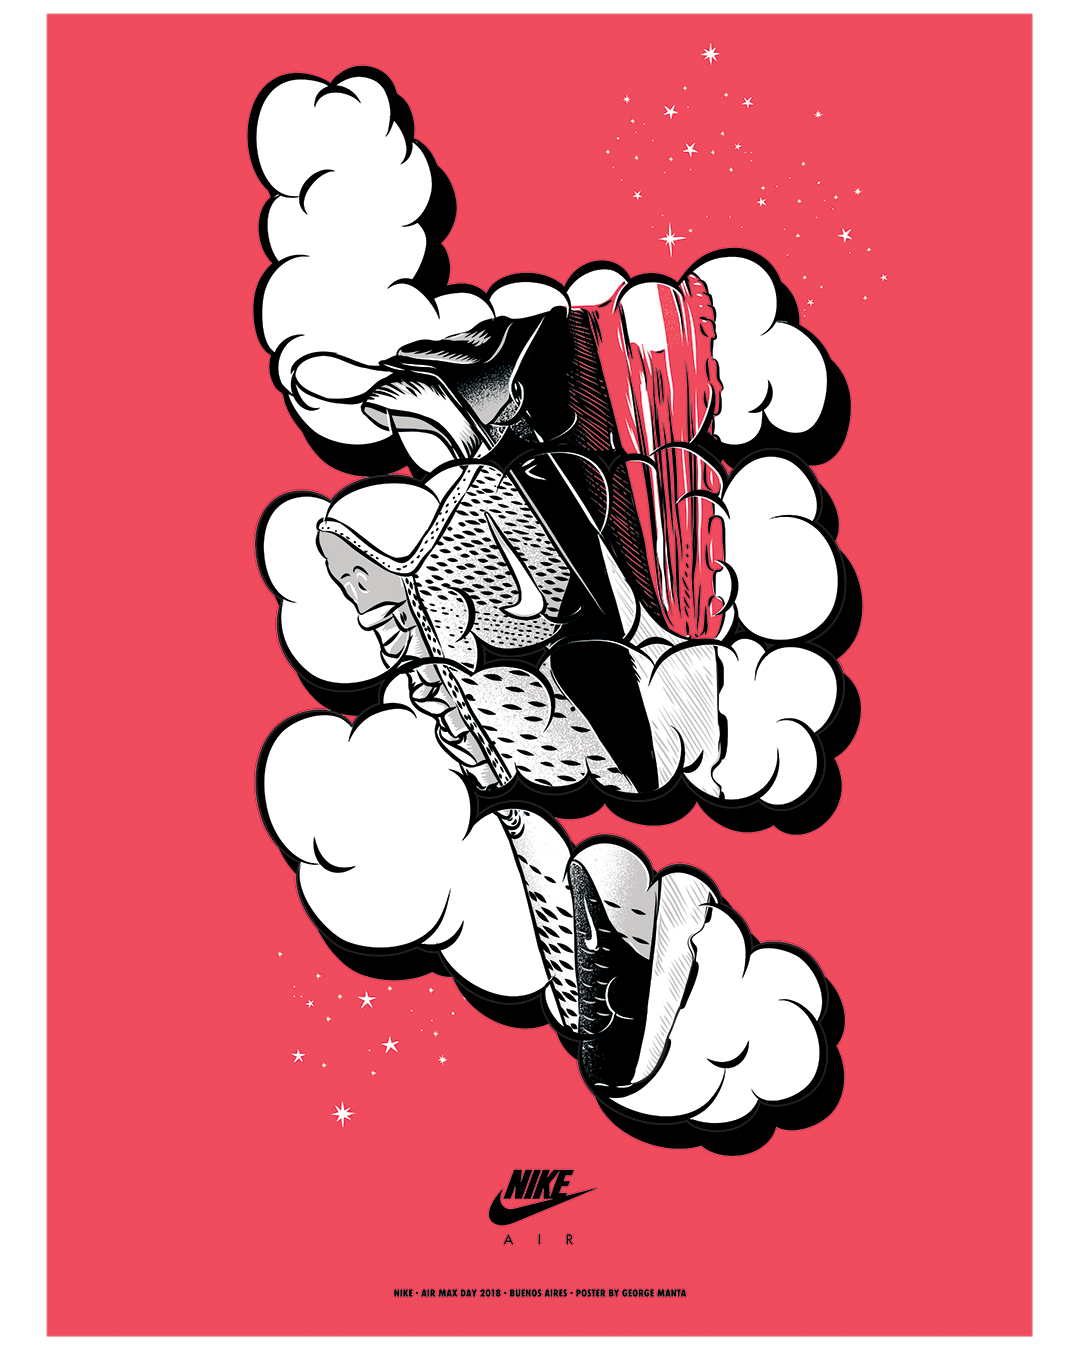 Nike Air Max Day 2018 (Buenos Aires) Posters on Behance